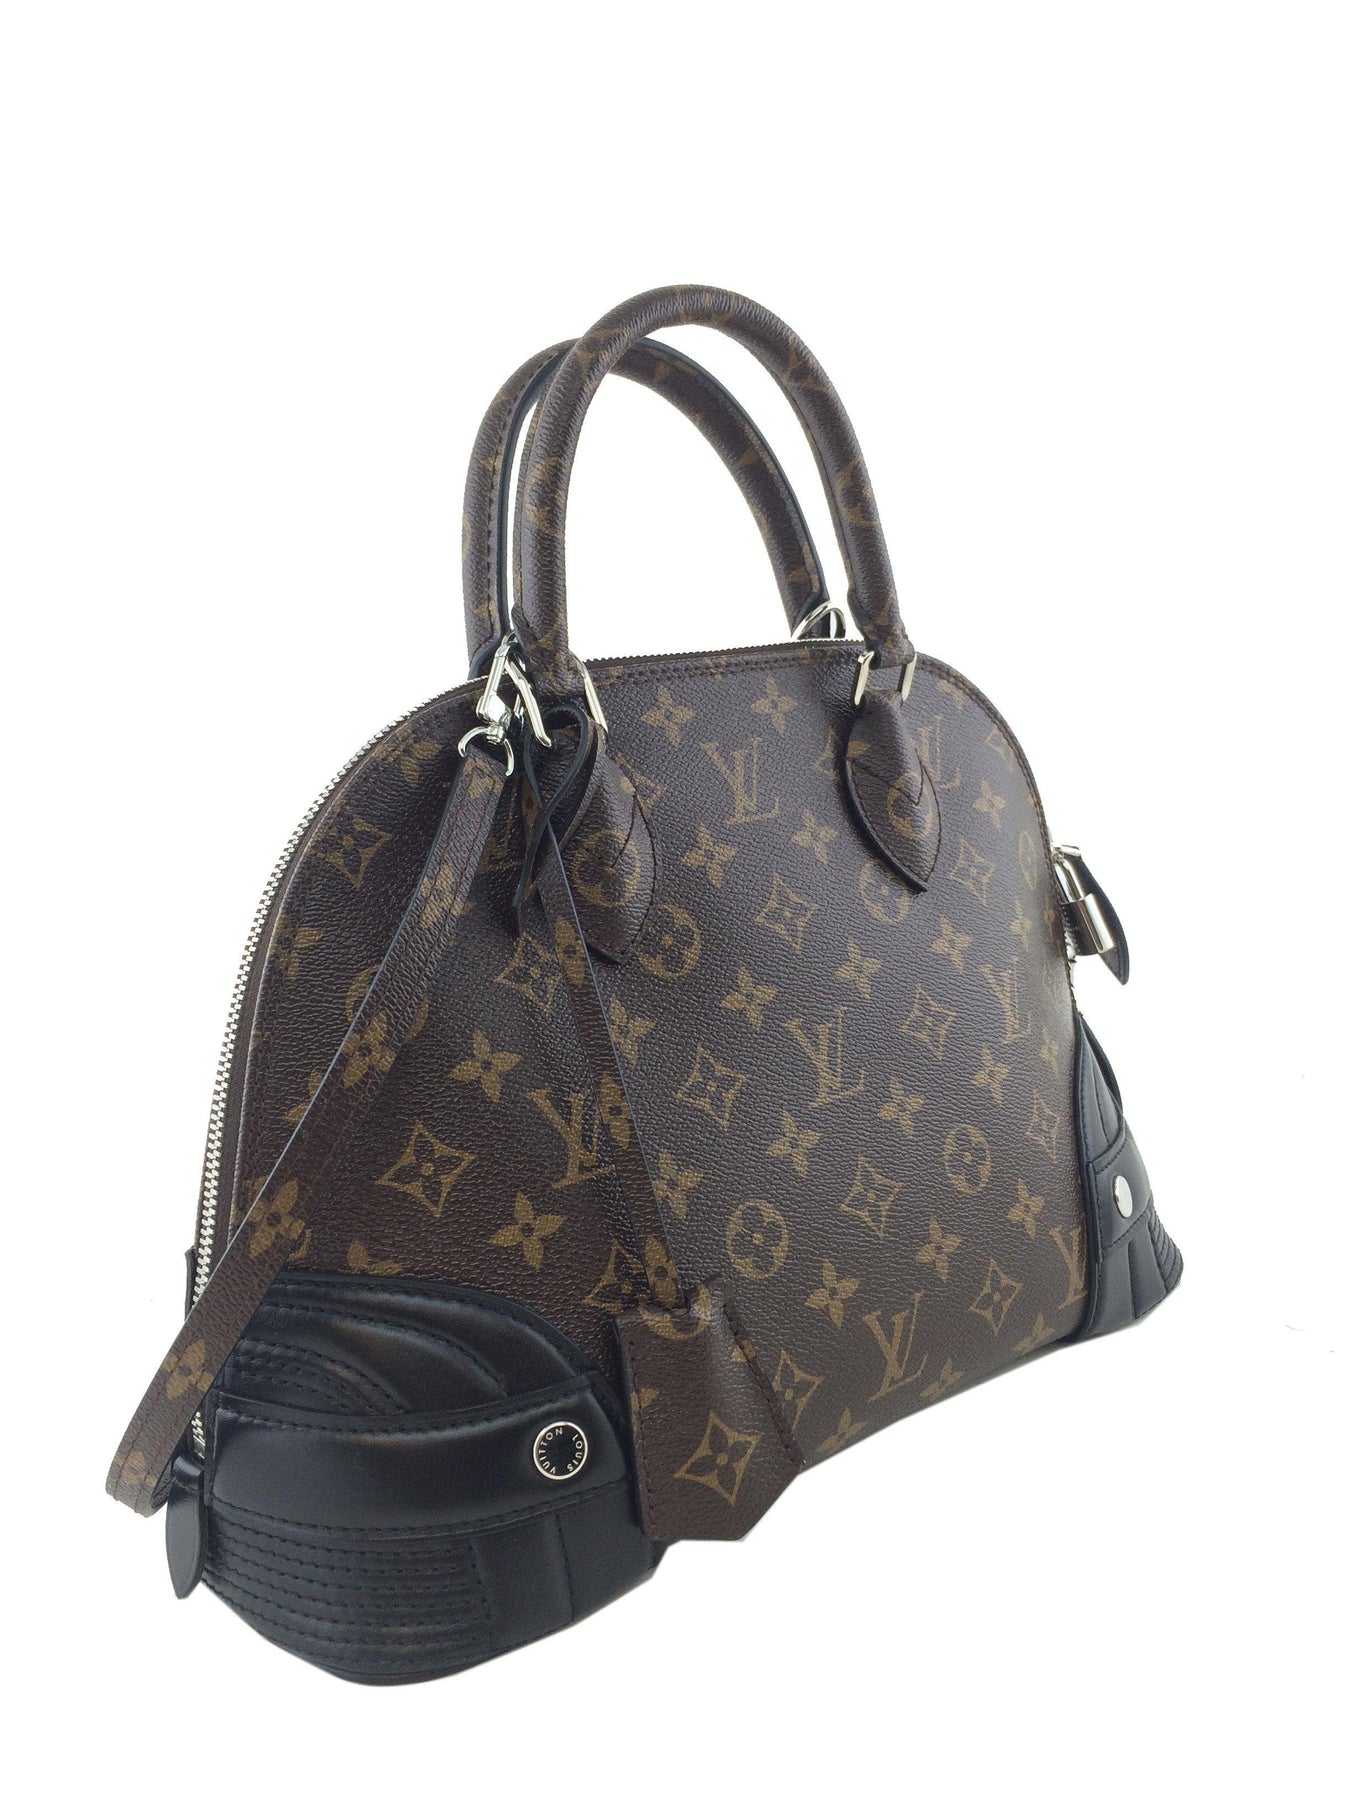 Hand Painted Customized Monogram Canvas Alma PM by Louis Vuitton at Gilt